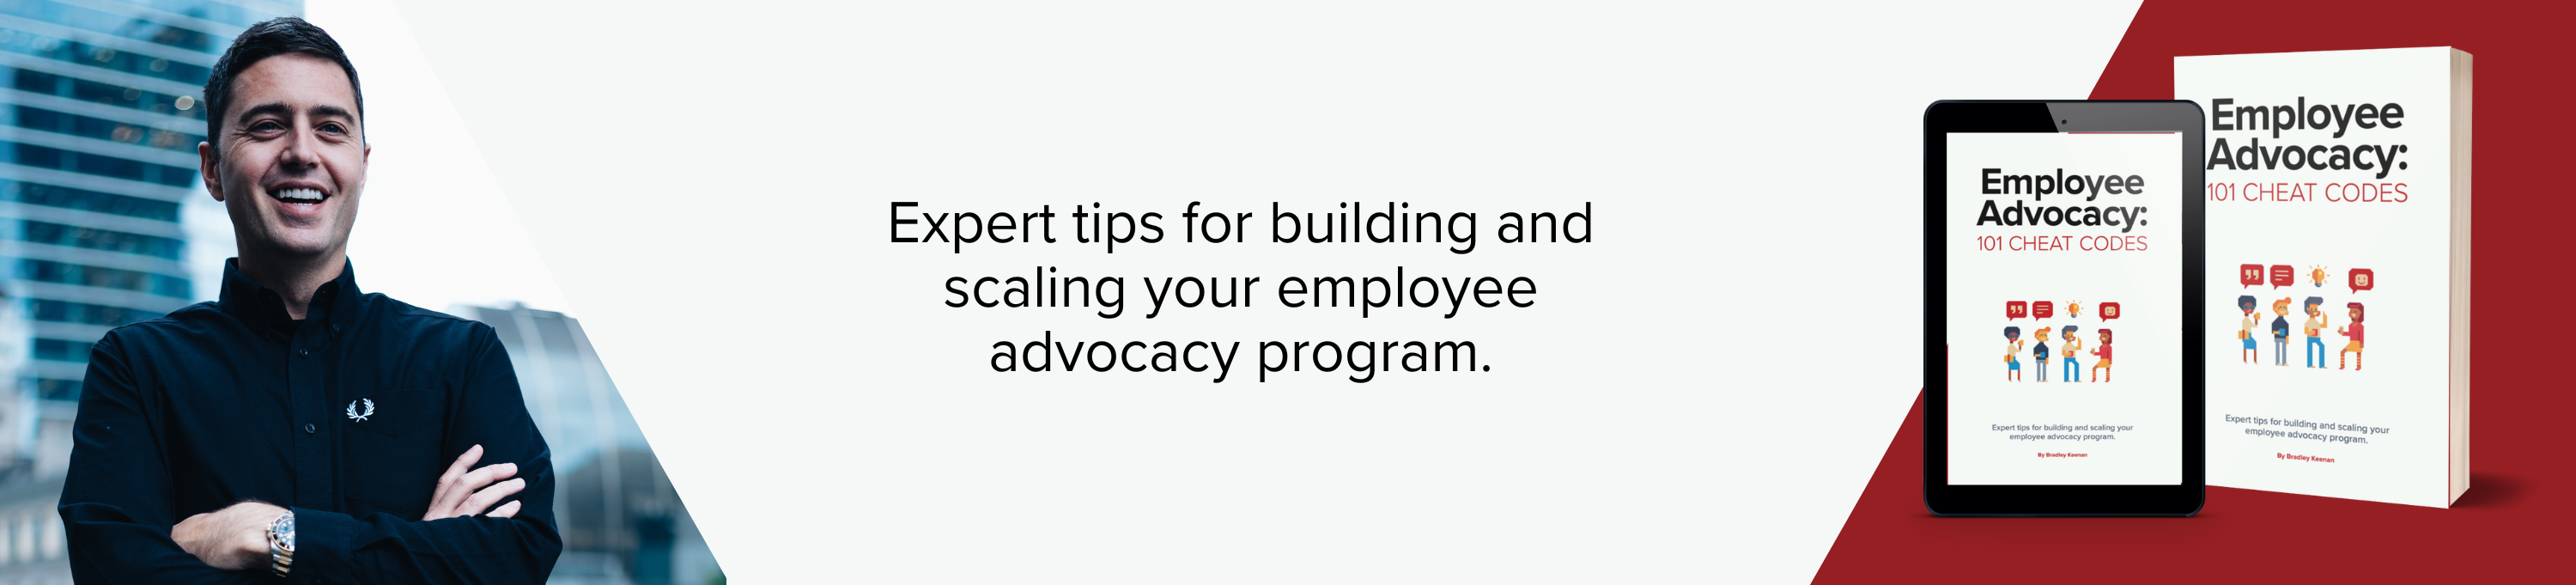 Expert tips for building and scaling your employee advocacy program